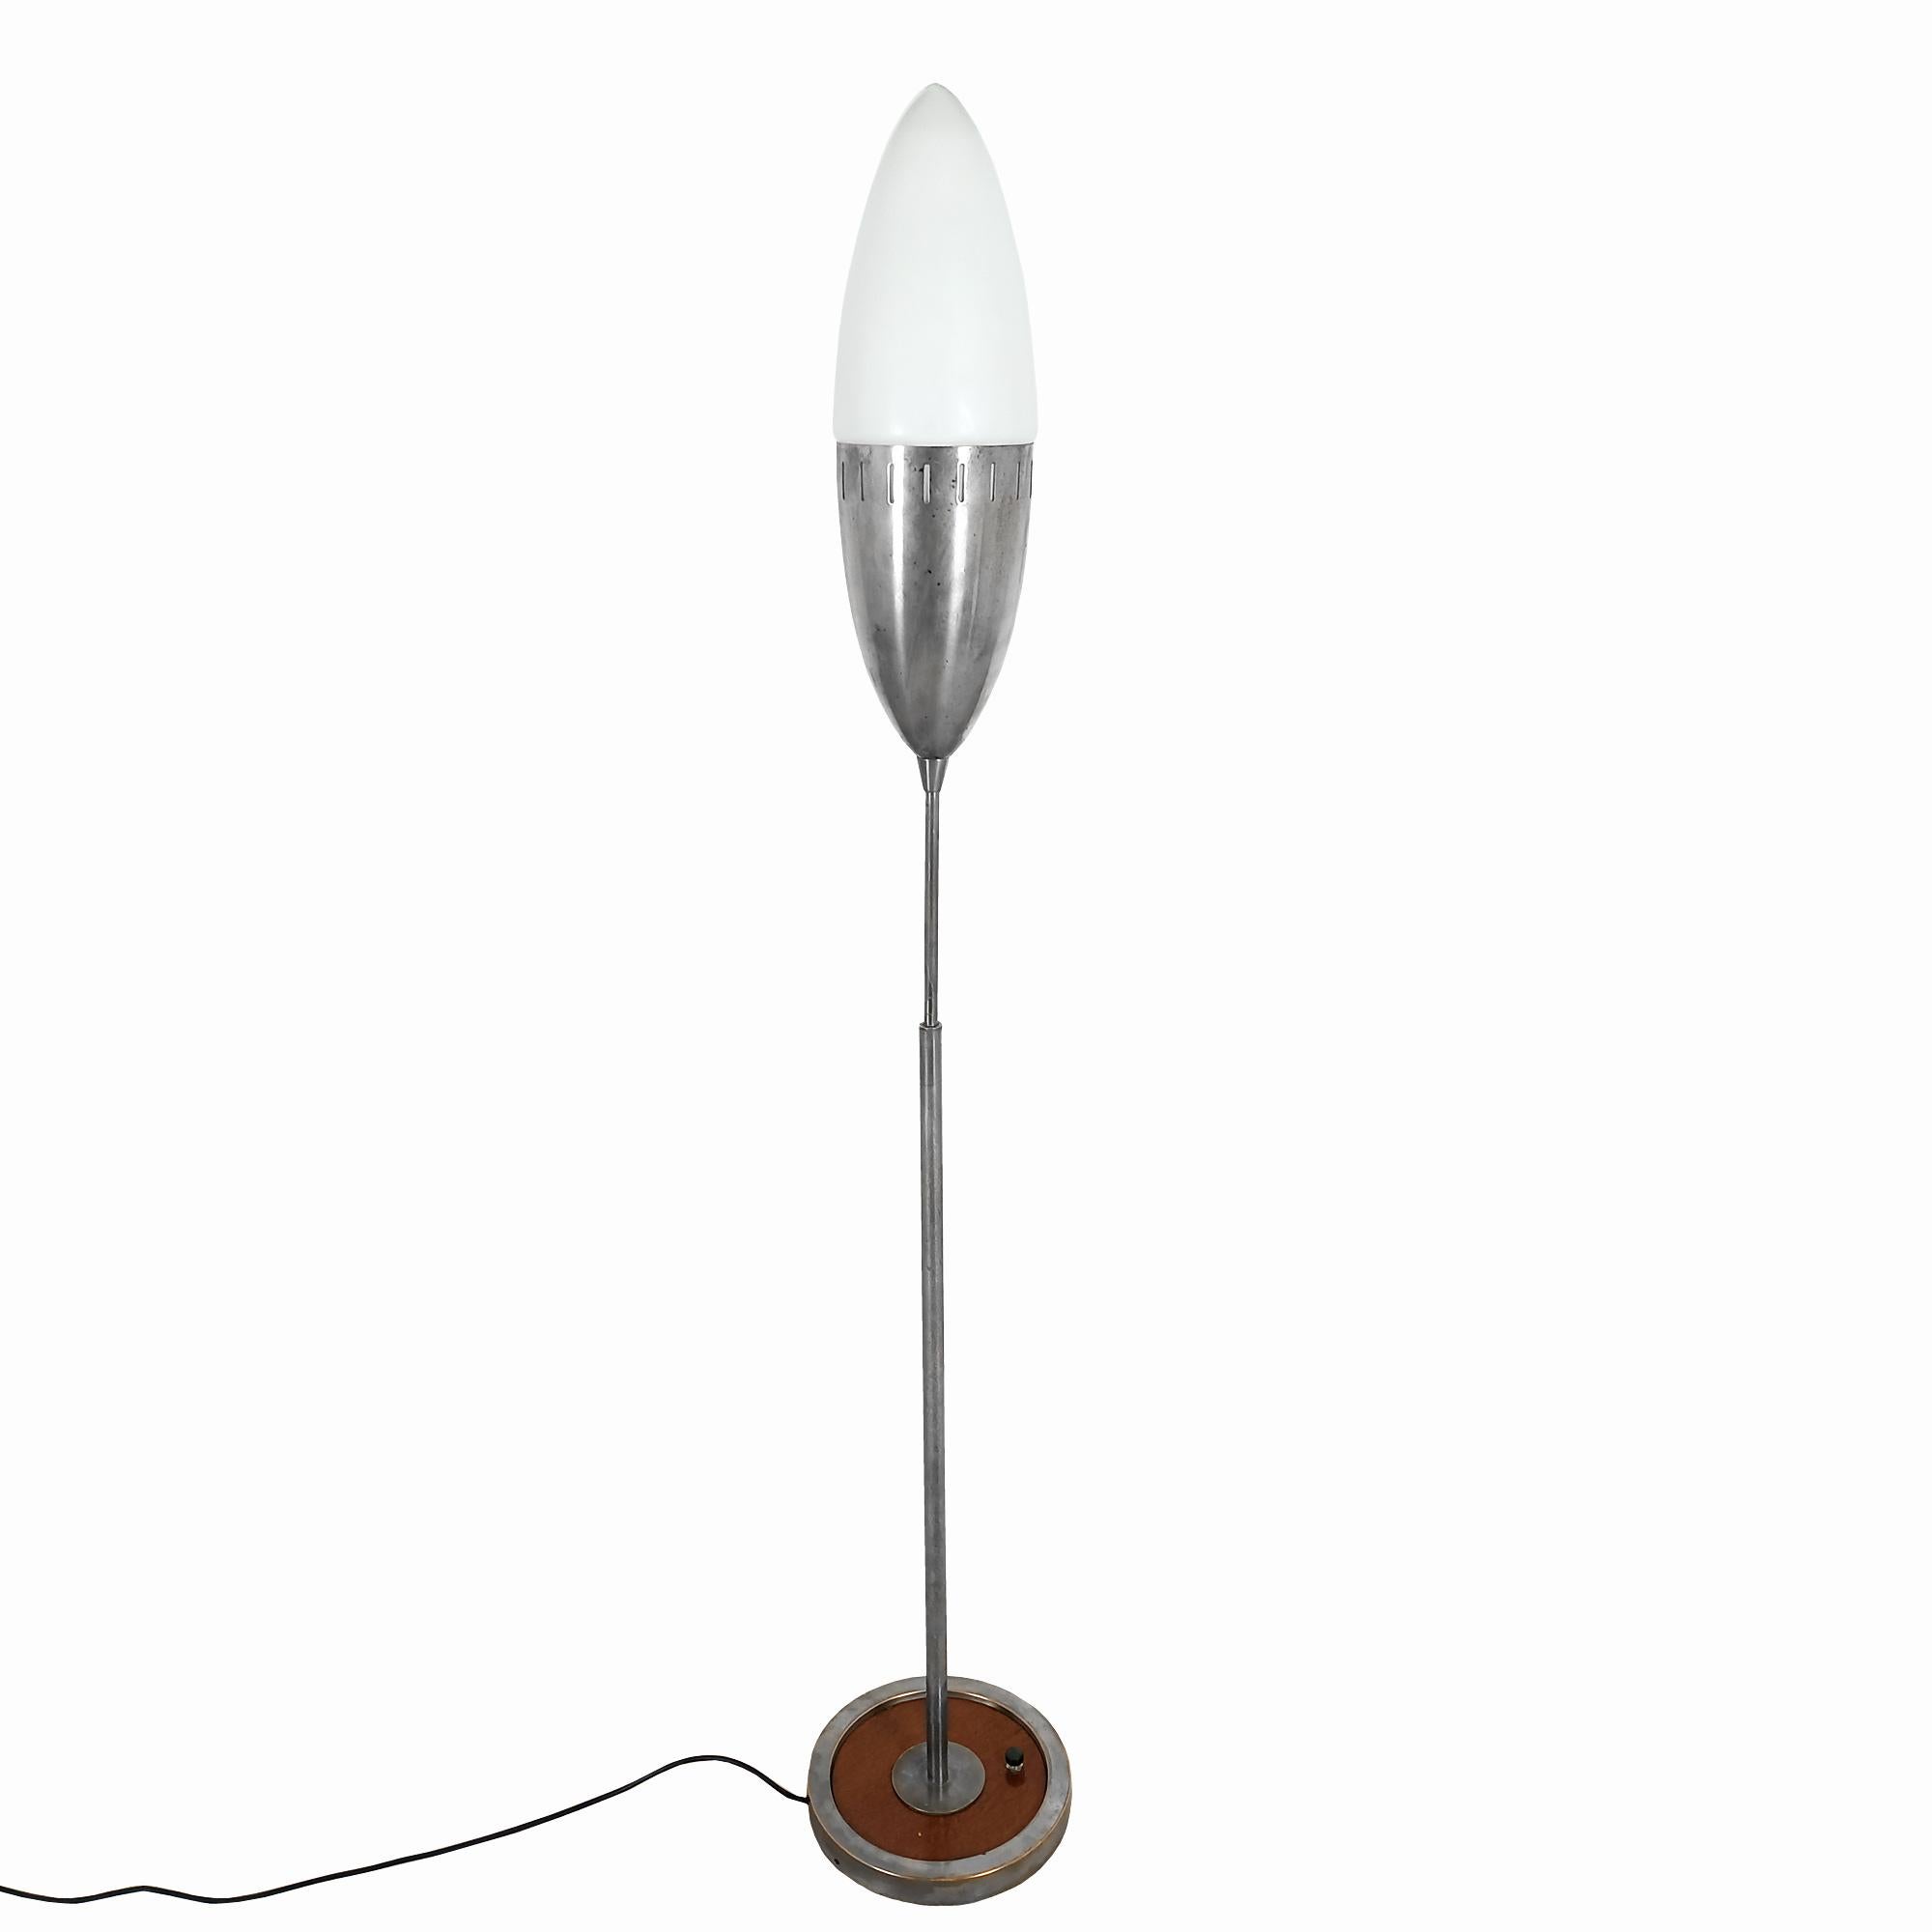 Stilnovo standing lamp, round base in oak and nickel-plated brass, original switch, long stem that ends in an elongated oval shape, half in nickel-plated brass, half in opaline glass.

Italy circa 1950.